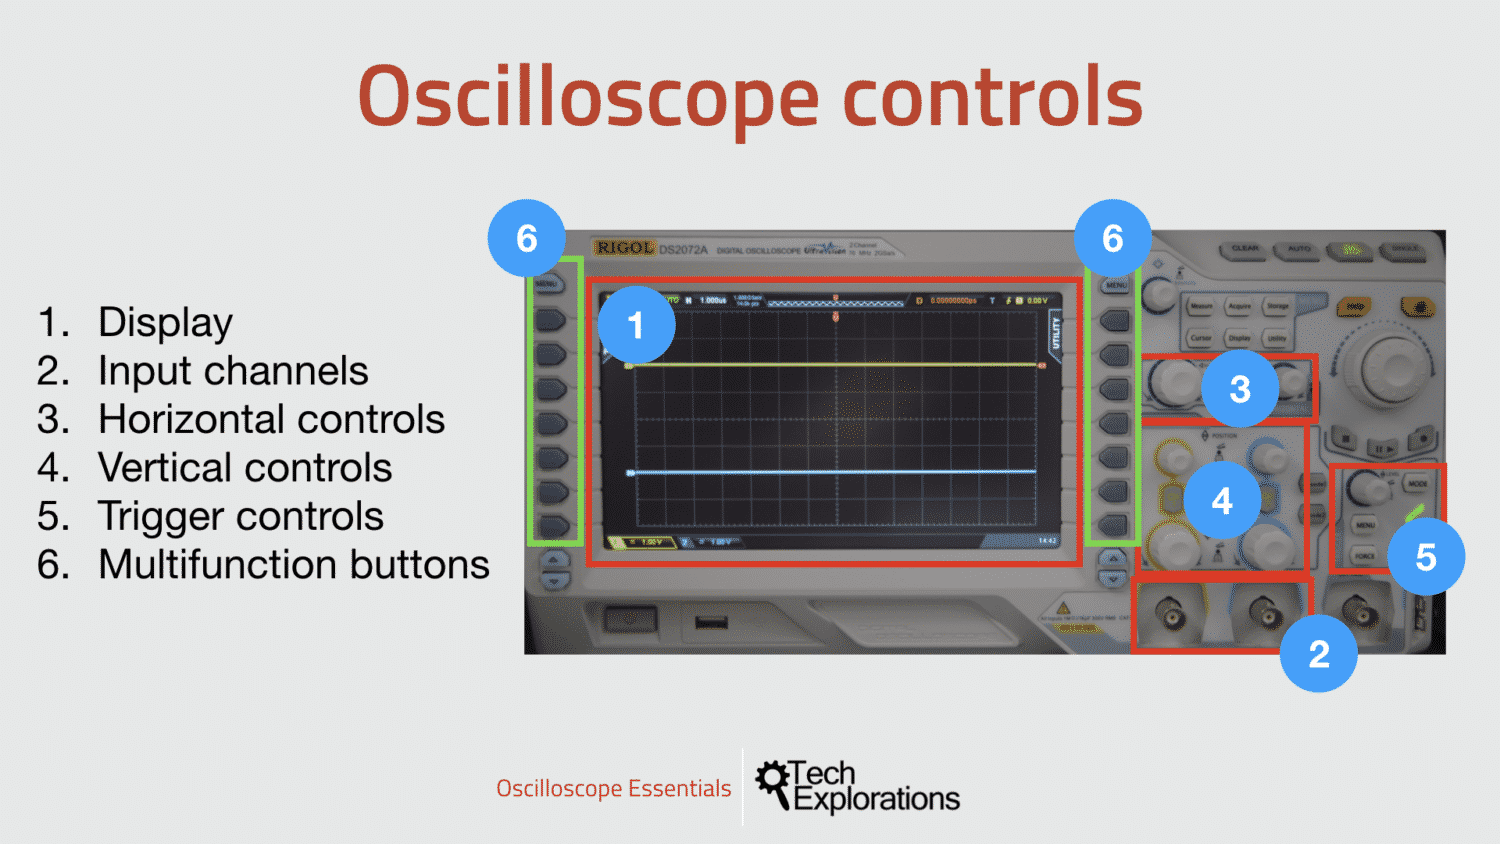 Oscilloscope basic controls, buttons and switches